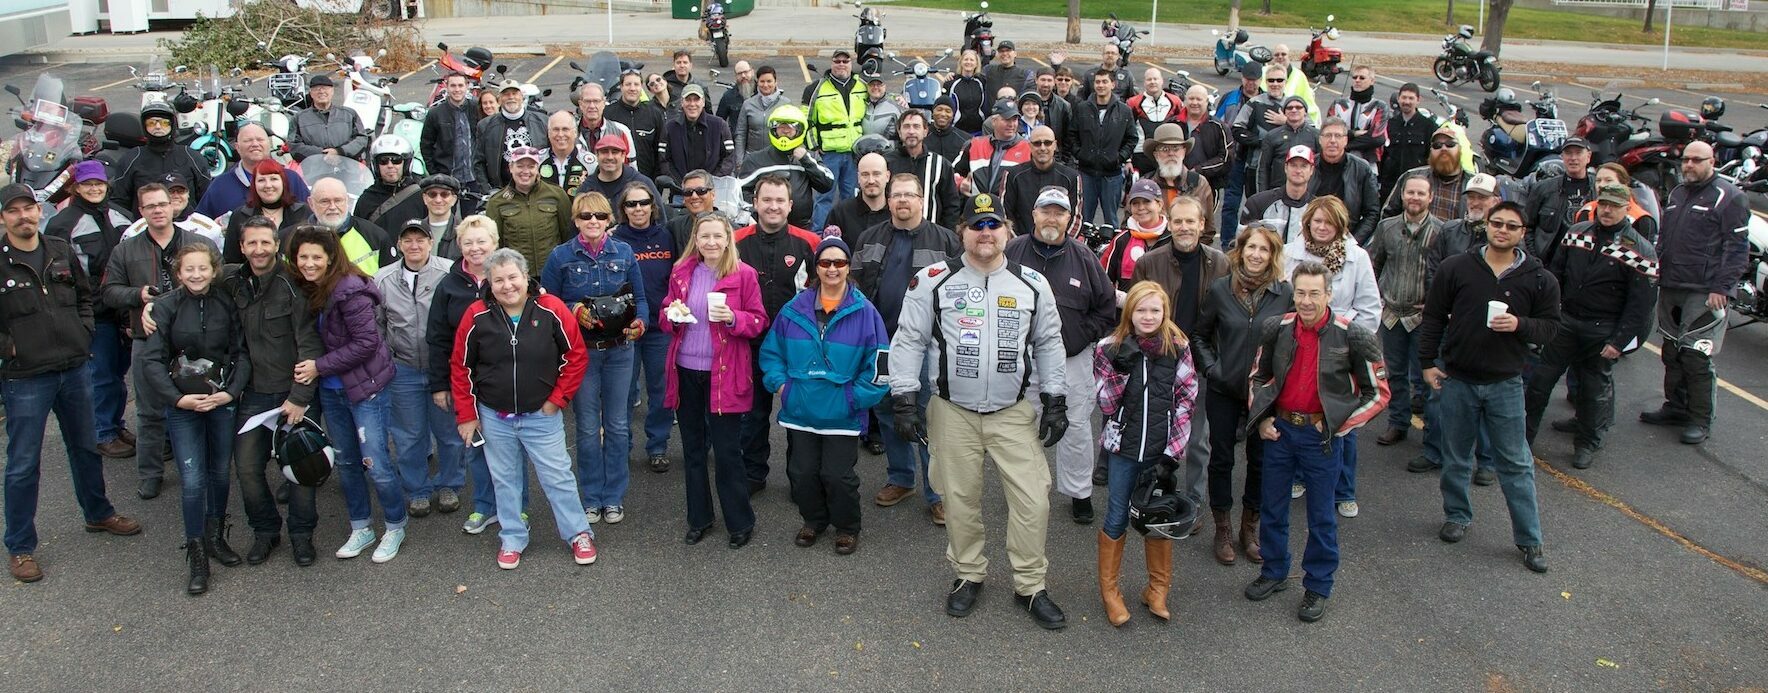 Group shot of riders participating in fundraising scooter ride